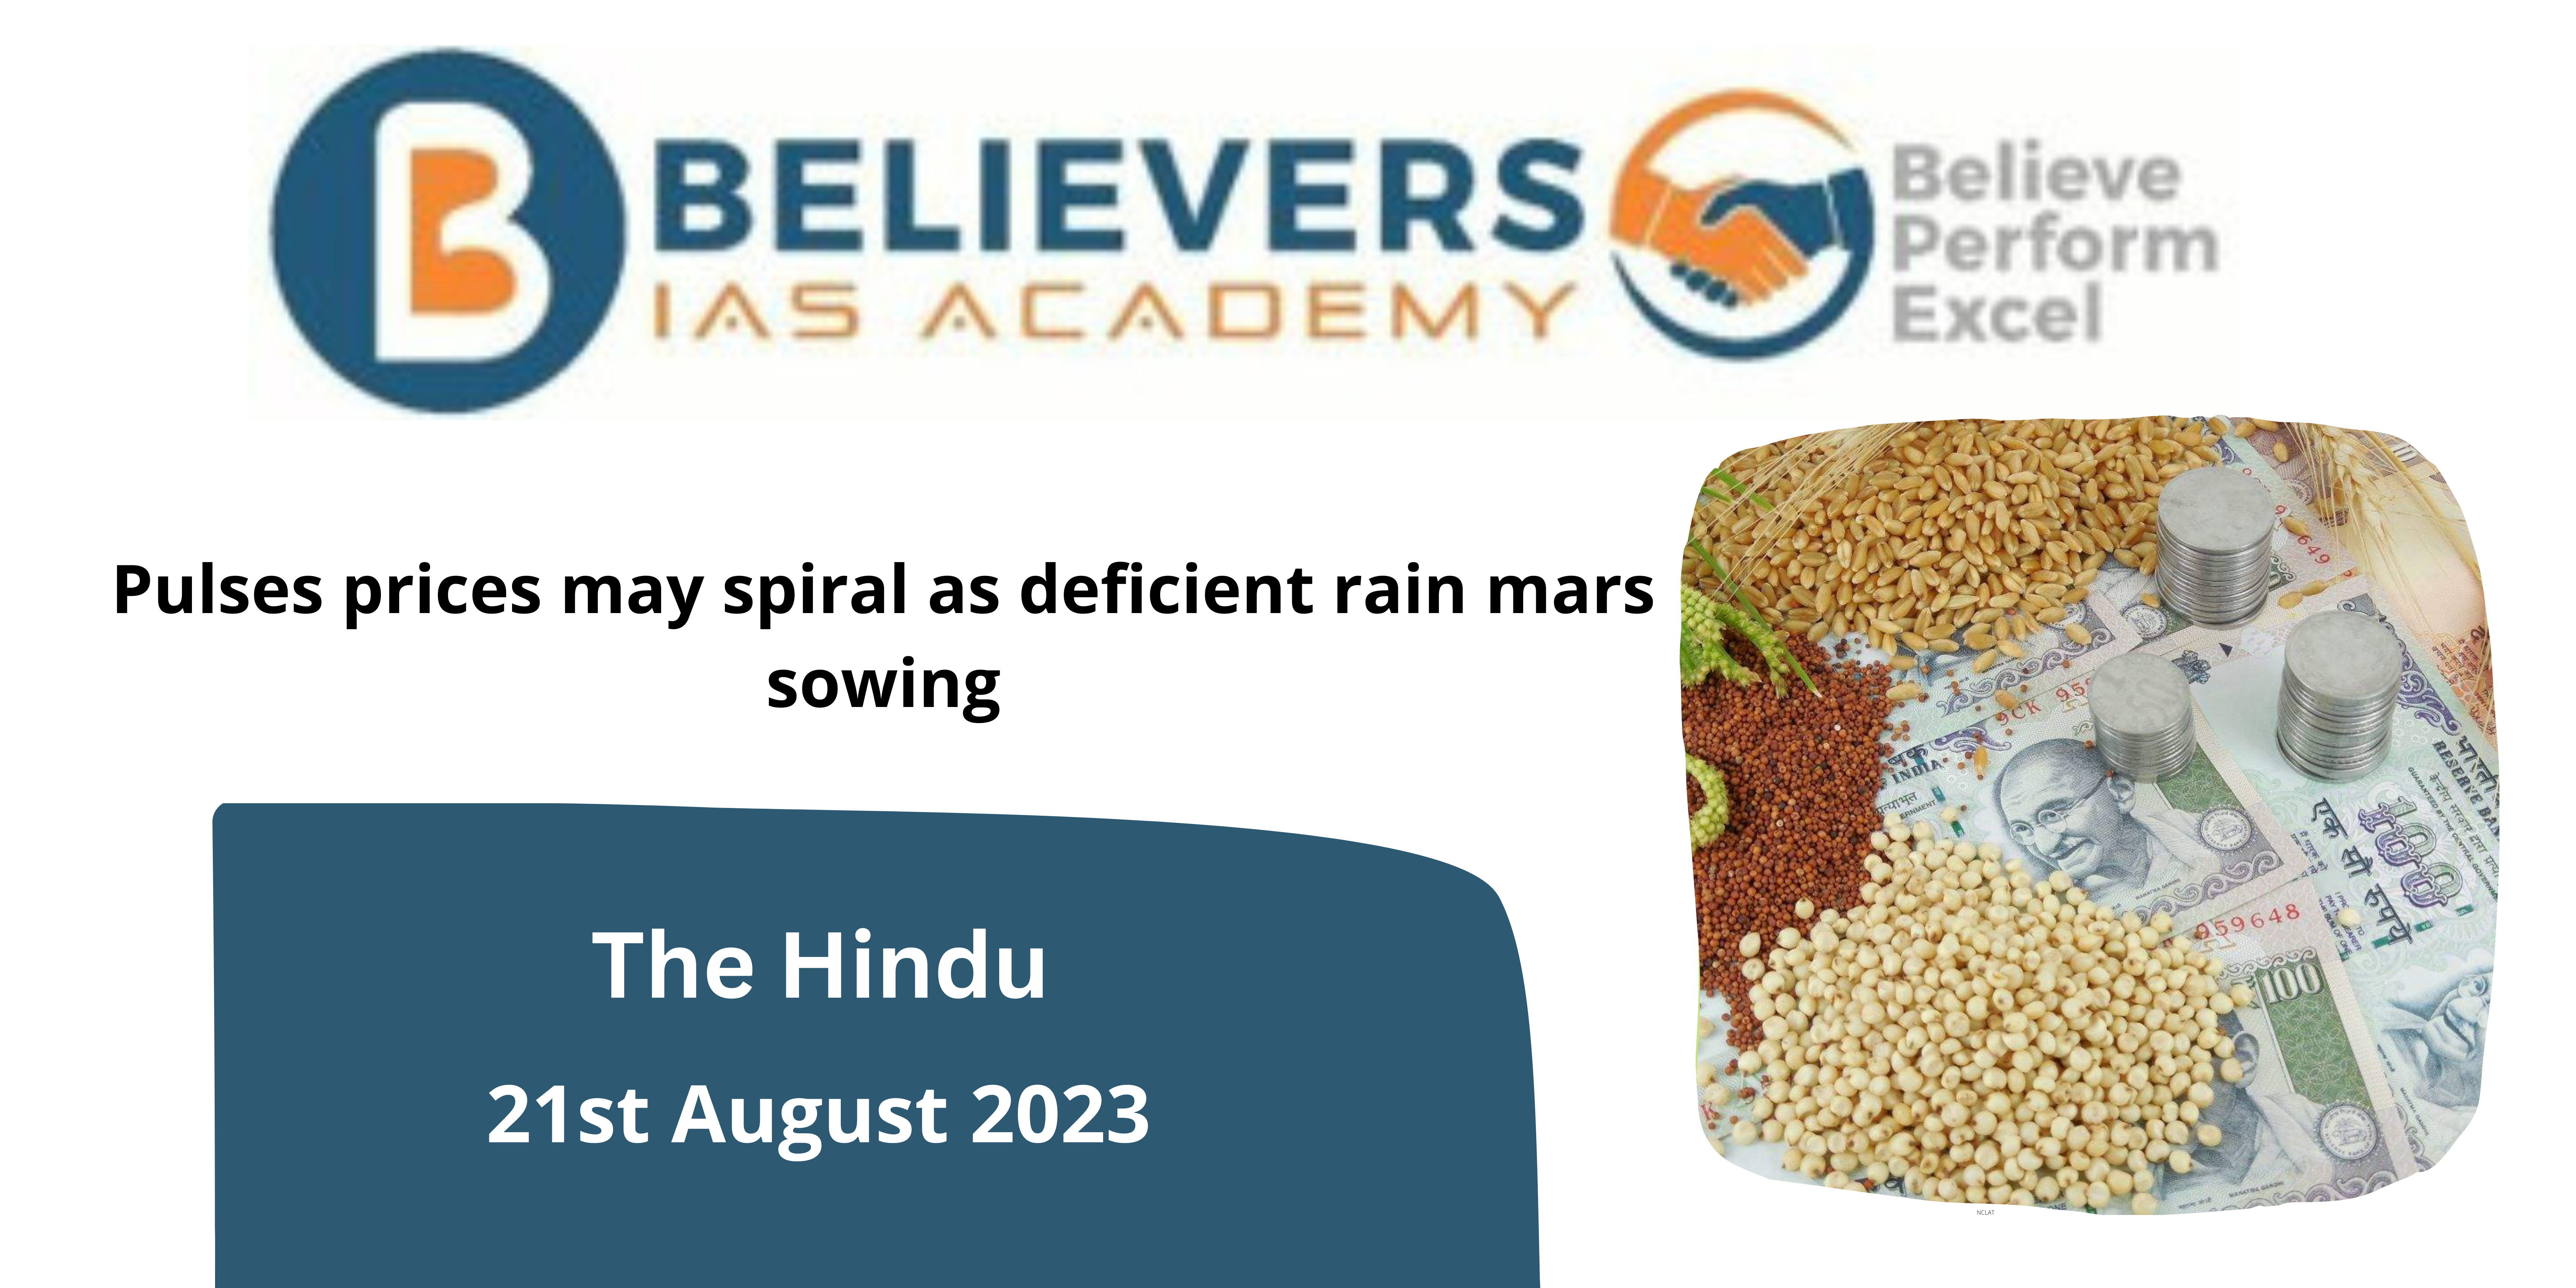 Pulses prices may spiral as deficient rain mars sowing